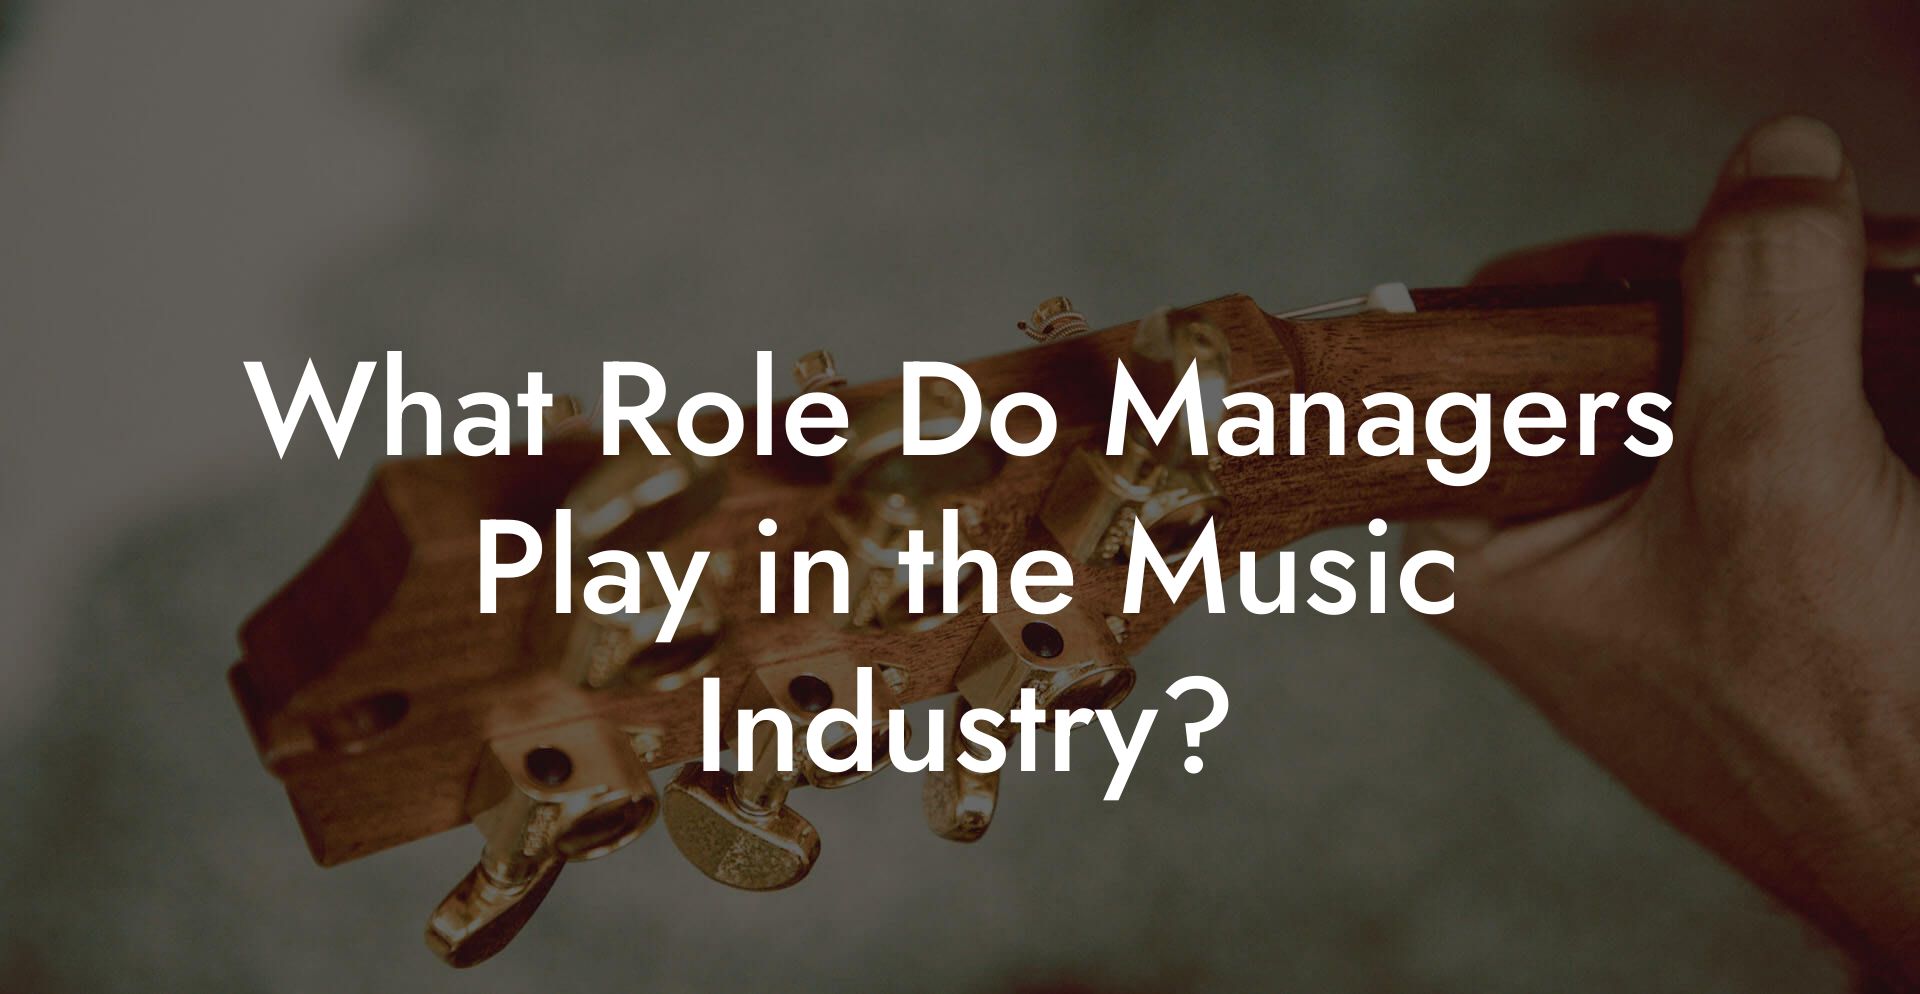 What Role Do Managers Play in the Music Industry